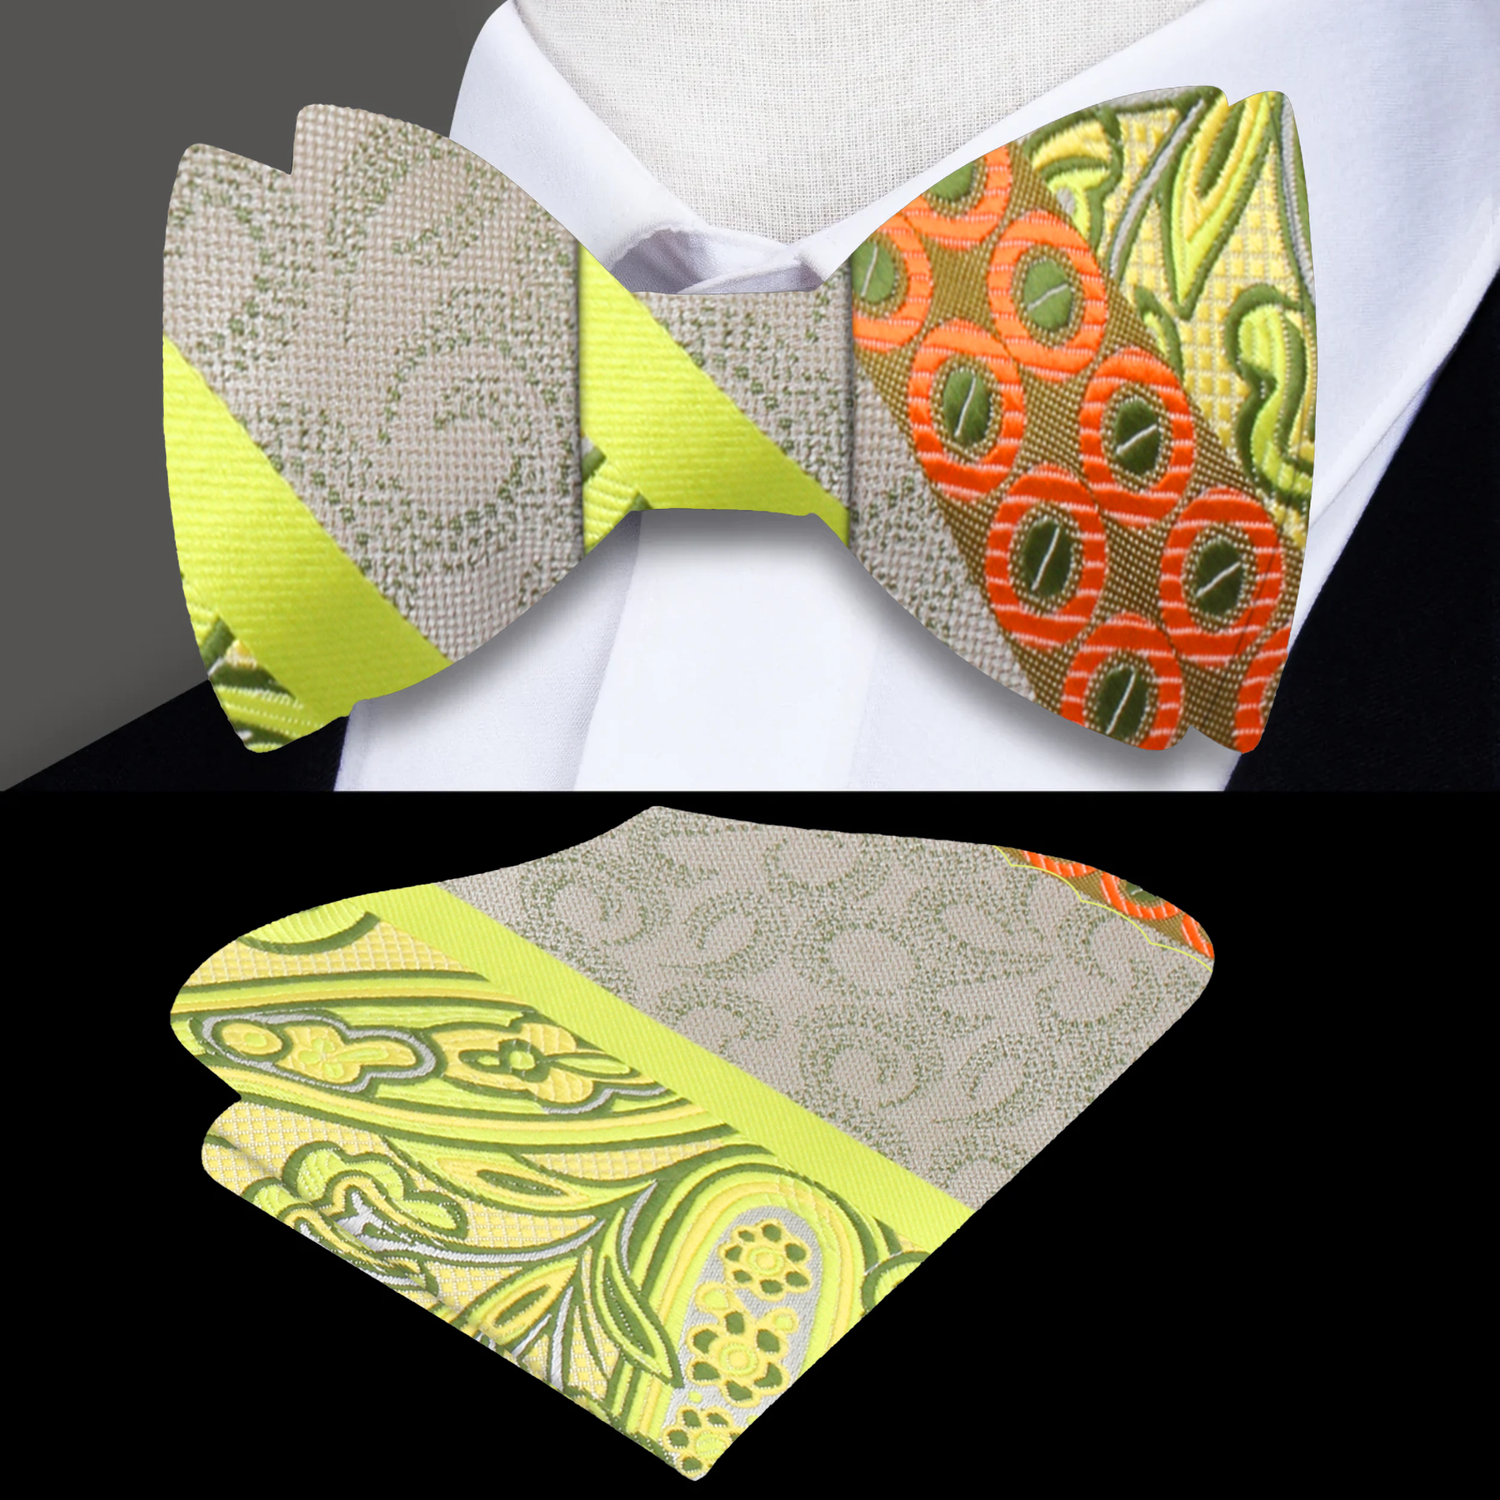 Main: A Yellow, Orange Abstract Waves, Paisley, Dot Pattern Silk Self Tie Bow Tie, With Matching Pocket Square